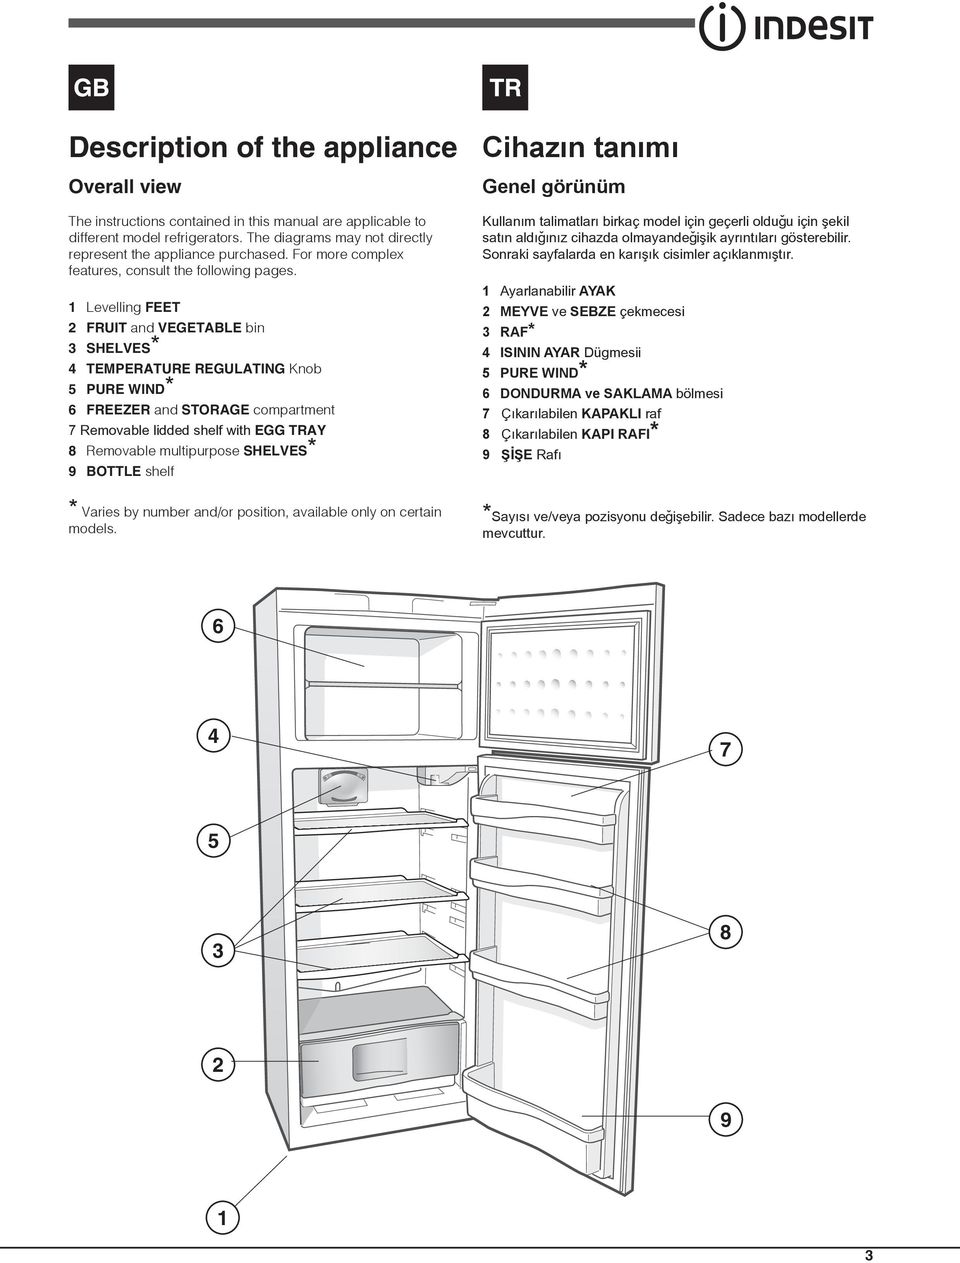 1 Levelling FEET 2 FRUIT and VEGETABLE bin 3 SHELVES* 4 TEMPERATURE REGULATING Knob 5 PURE WIND* 6 FREEZER and STORAGE compartment 7 Removable lidded shelf with EGG TRAY 8 Removable multipurpose